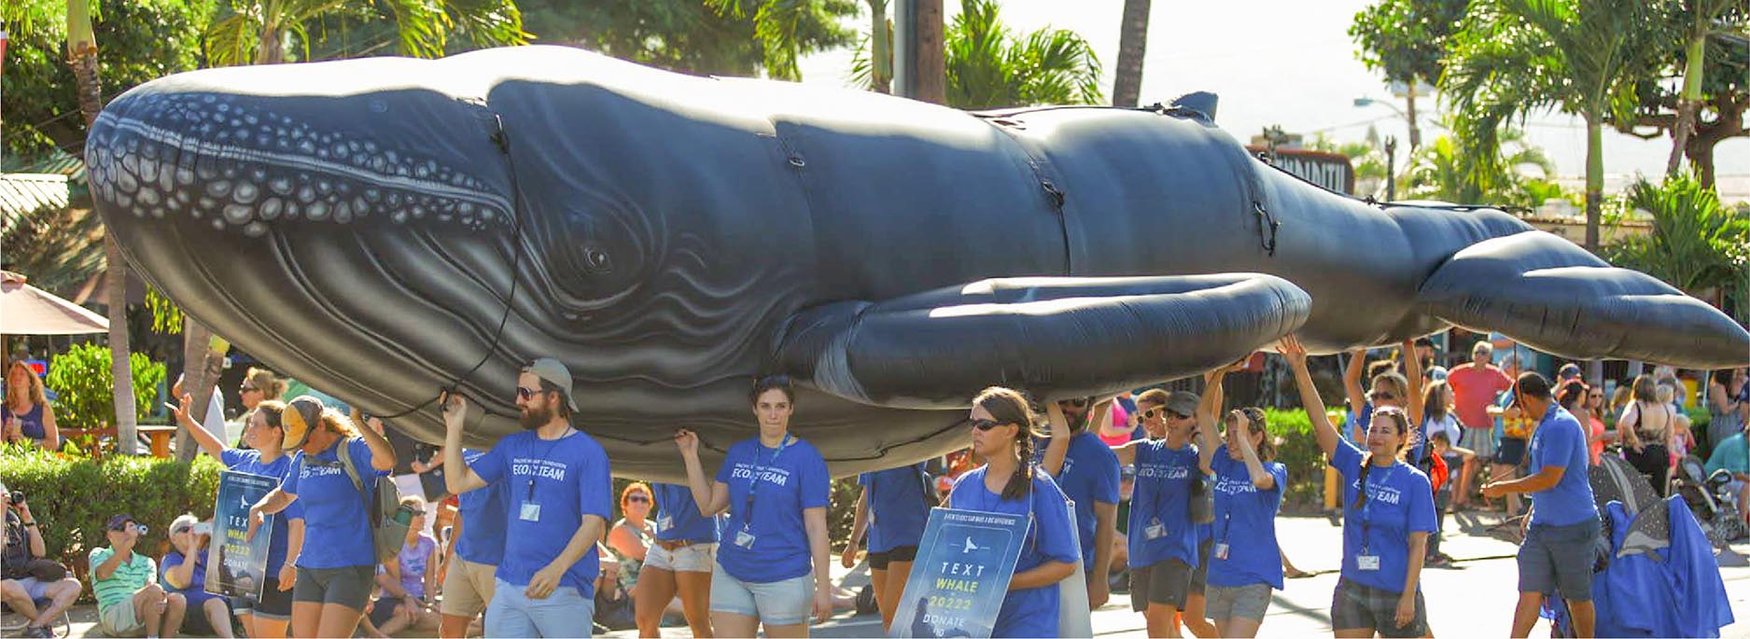 large inflatable whale in parade being carried by a group of demonstrators trying to protect whales